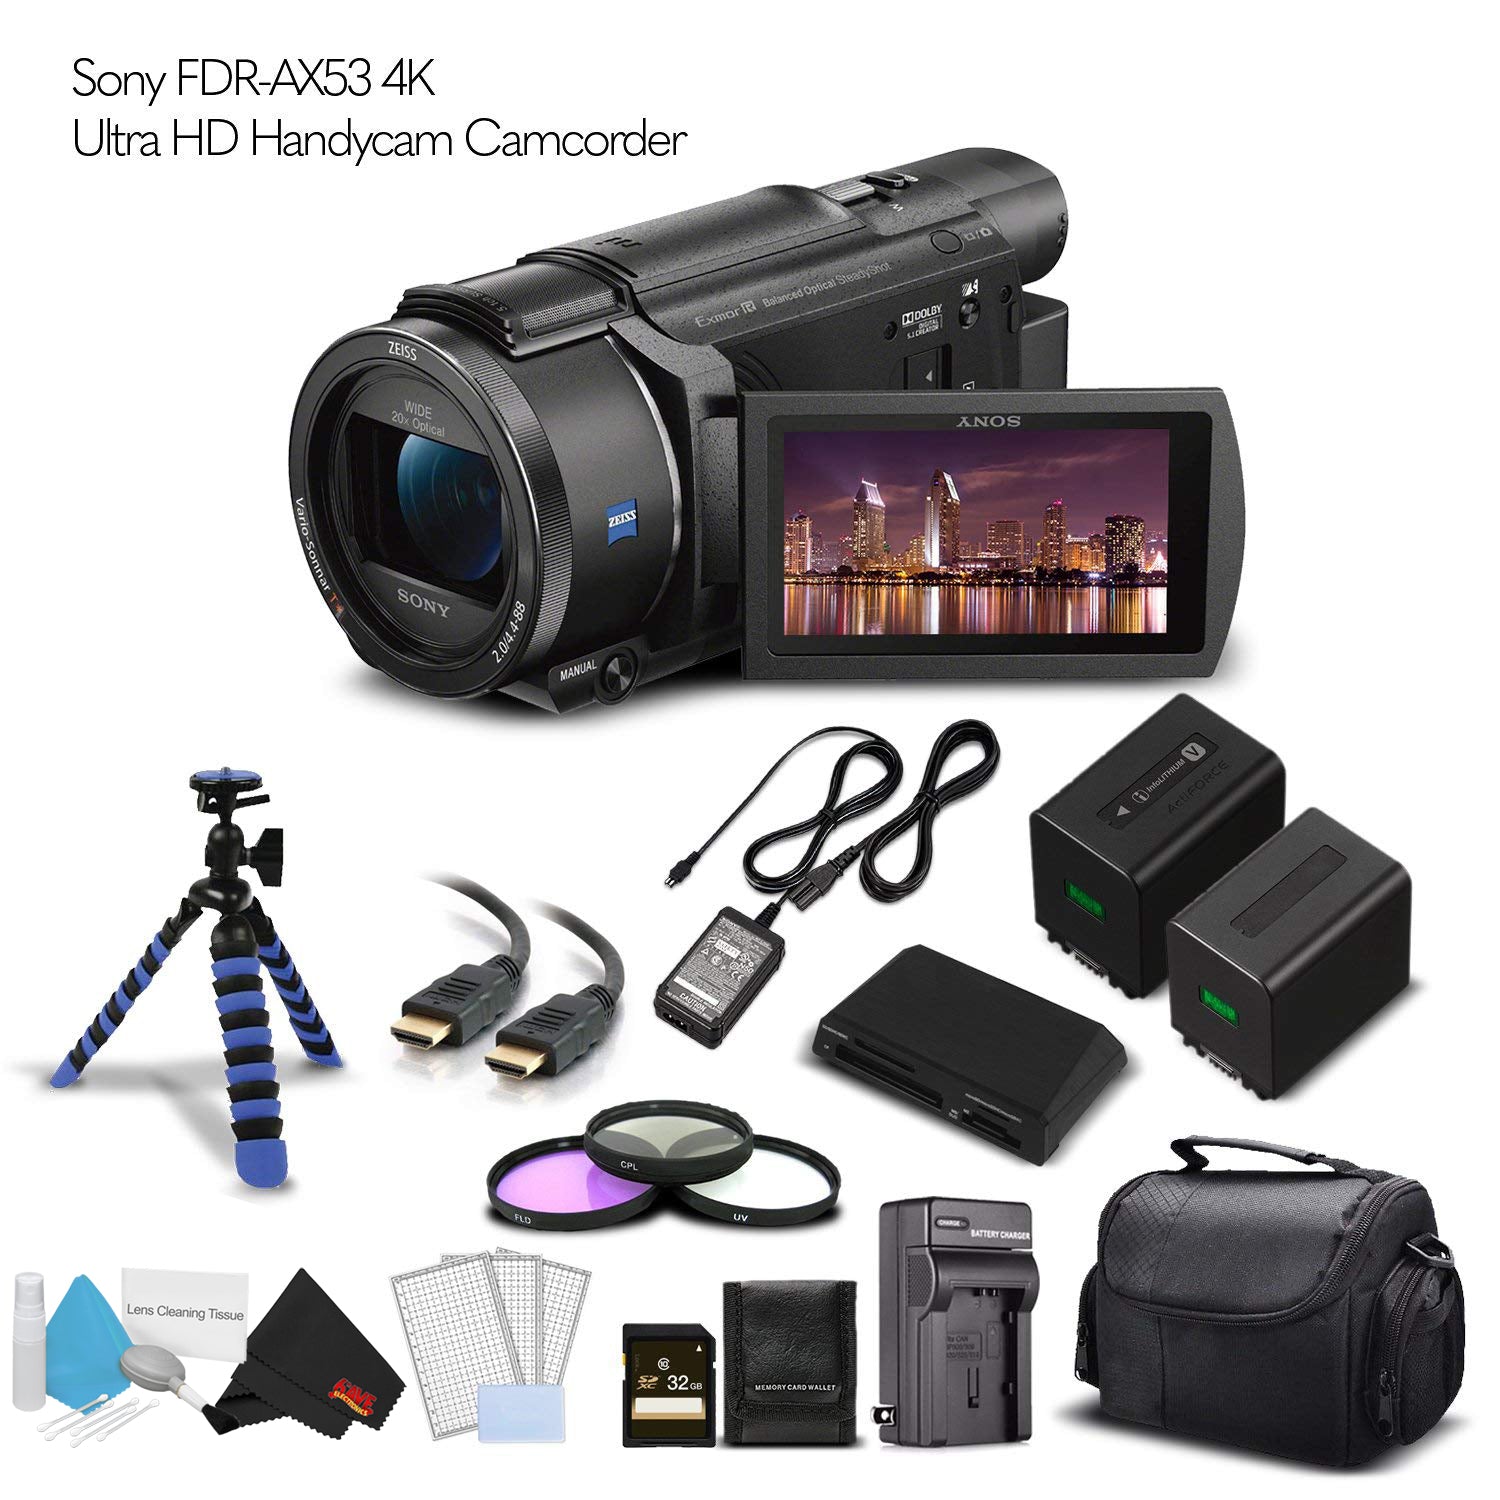 Sony FDR-AX53 4K Ultra HD Handycam Camcorder International Version With Extra Battery, Case, Memory Card Base Bundle